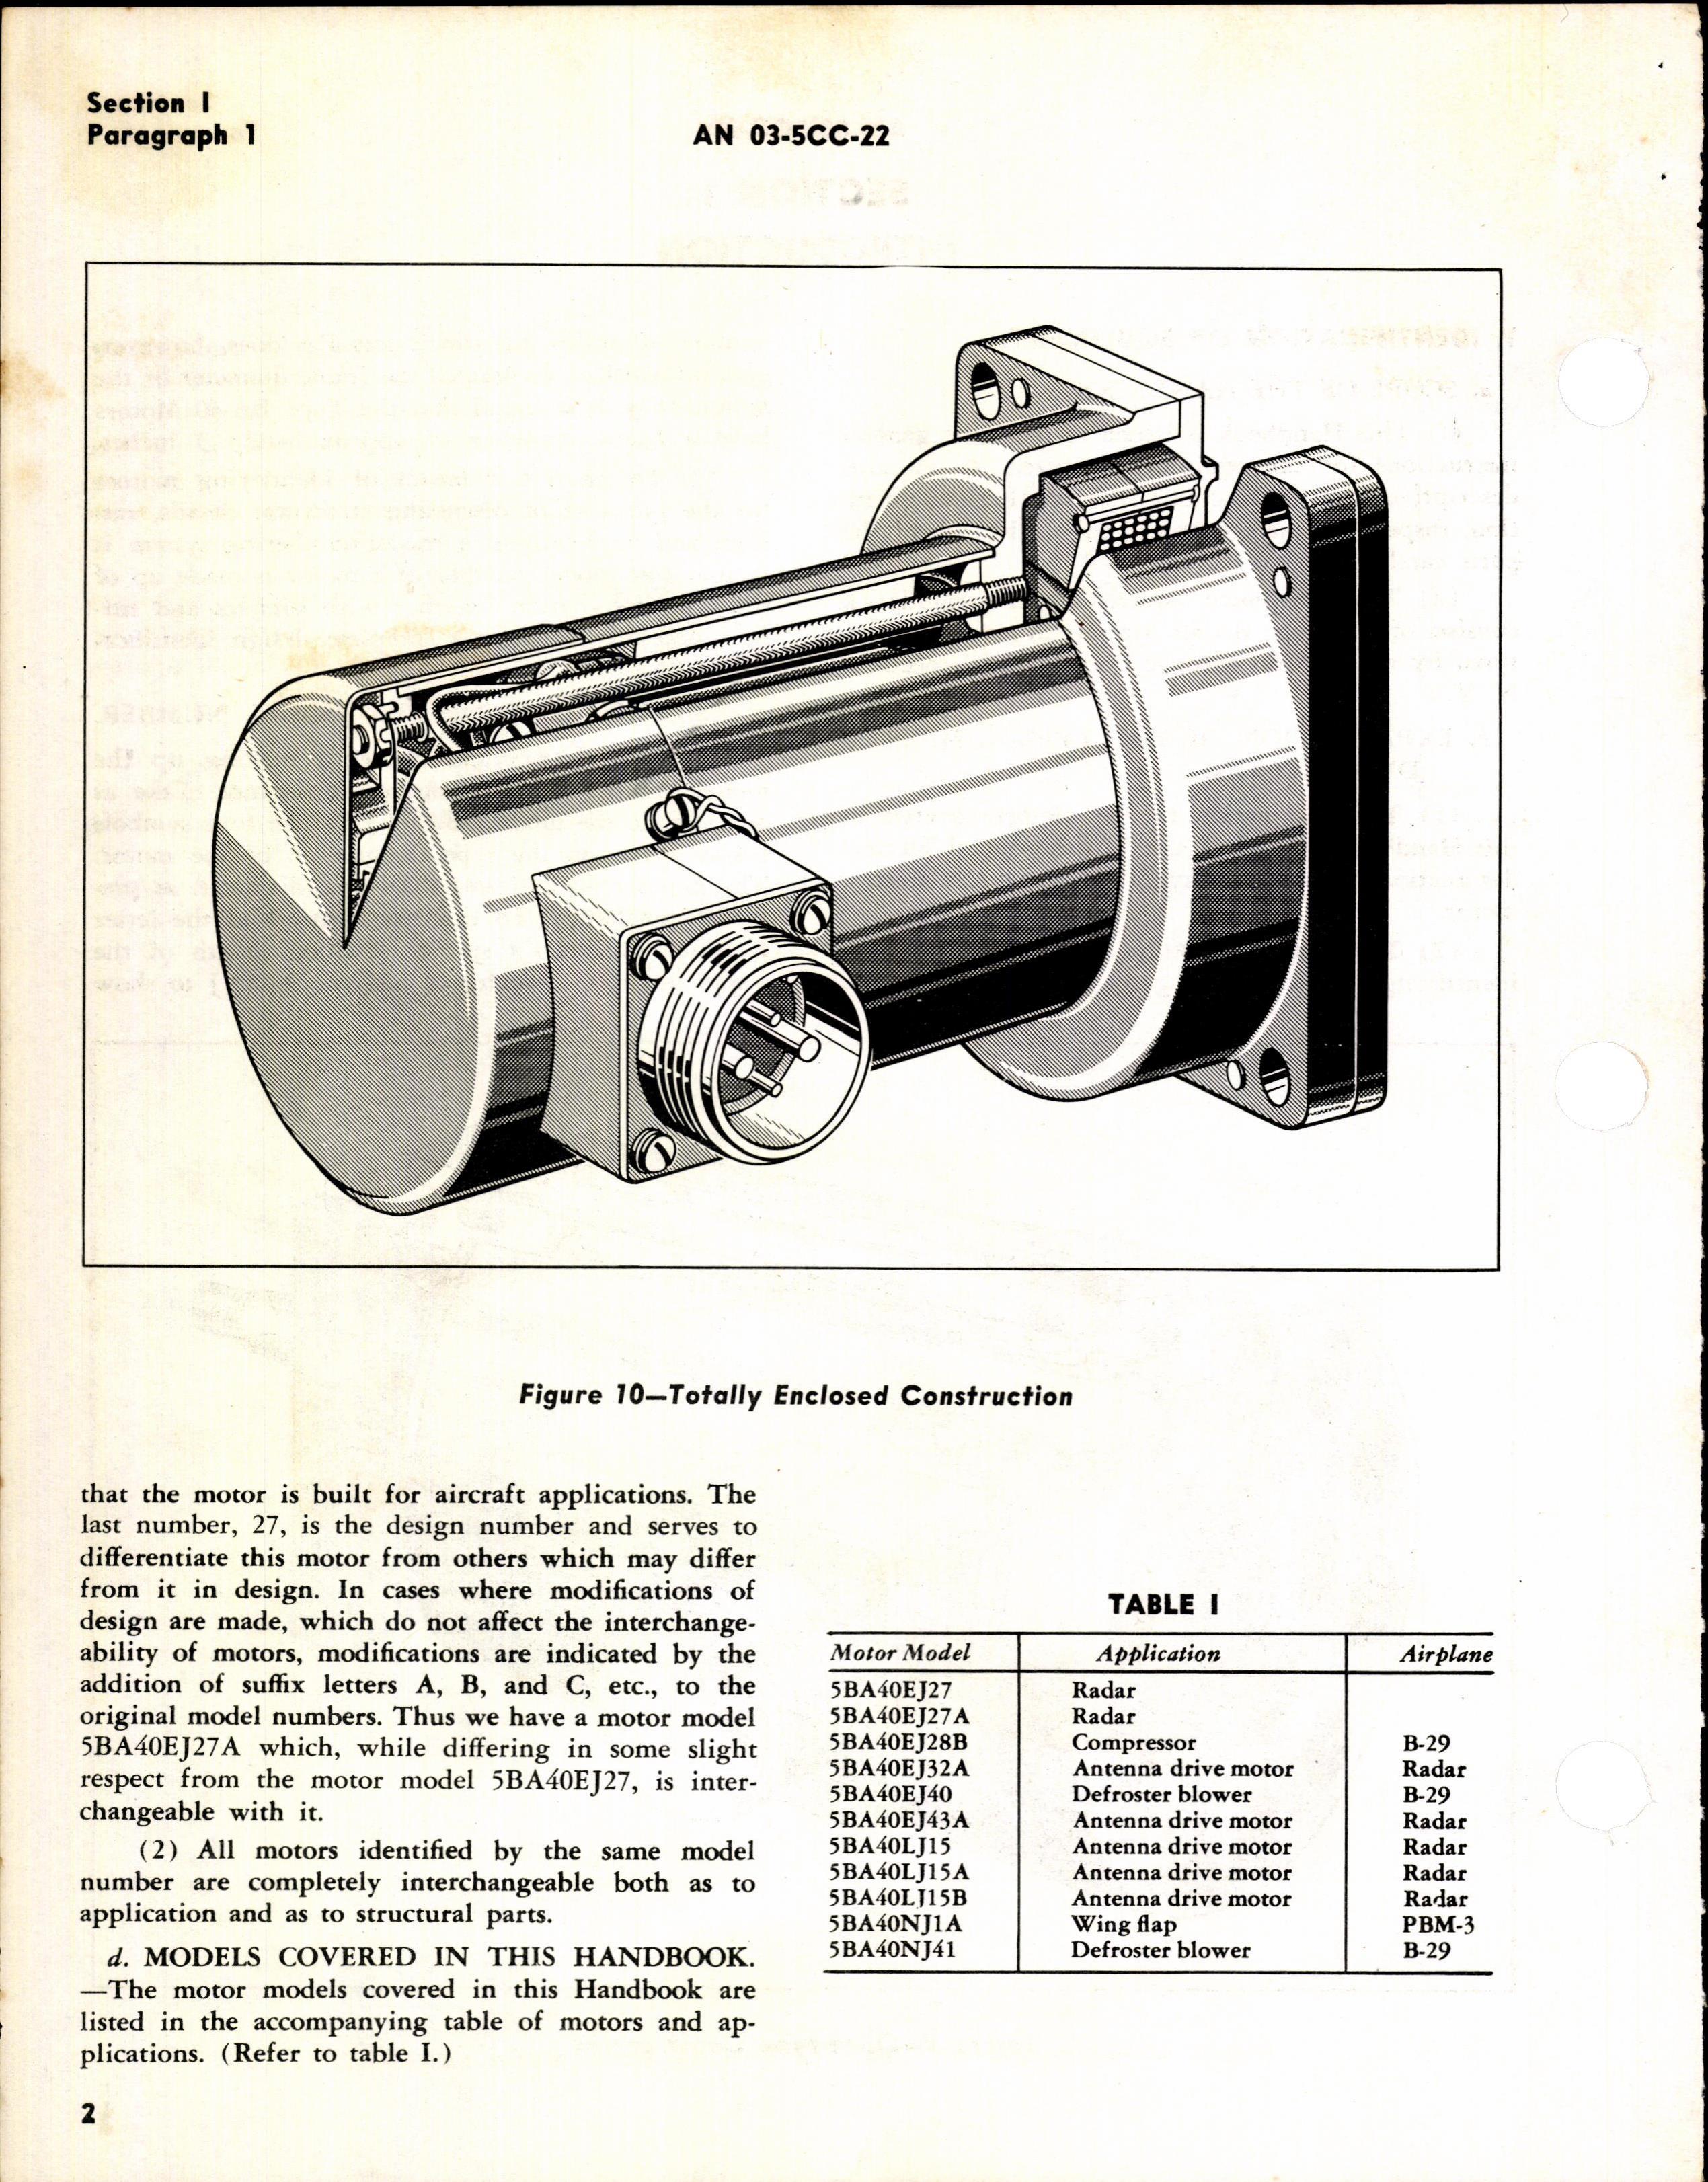 Sample page 4 from AirCorps Library document: HB of Instructions with Parts Catalog for Model 5BA40 Electric Motors